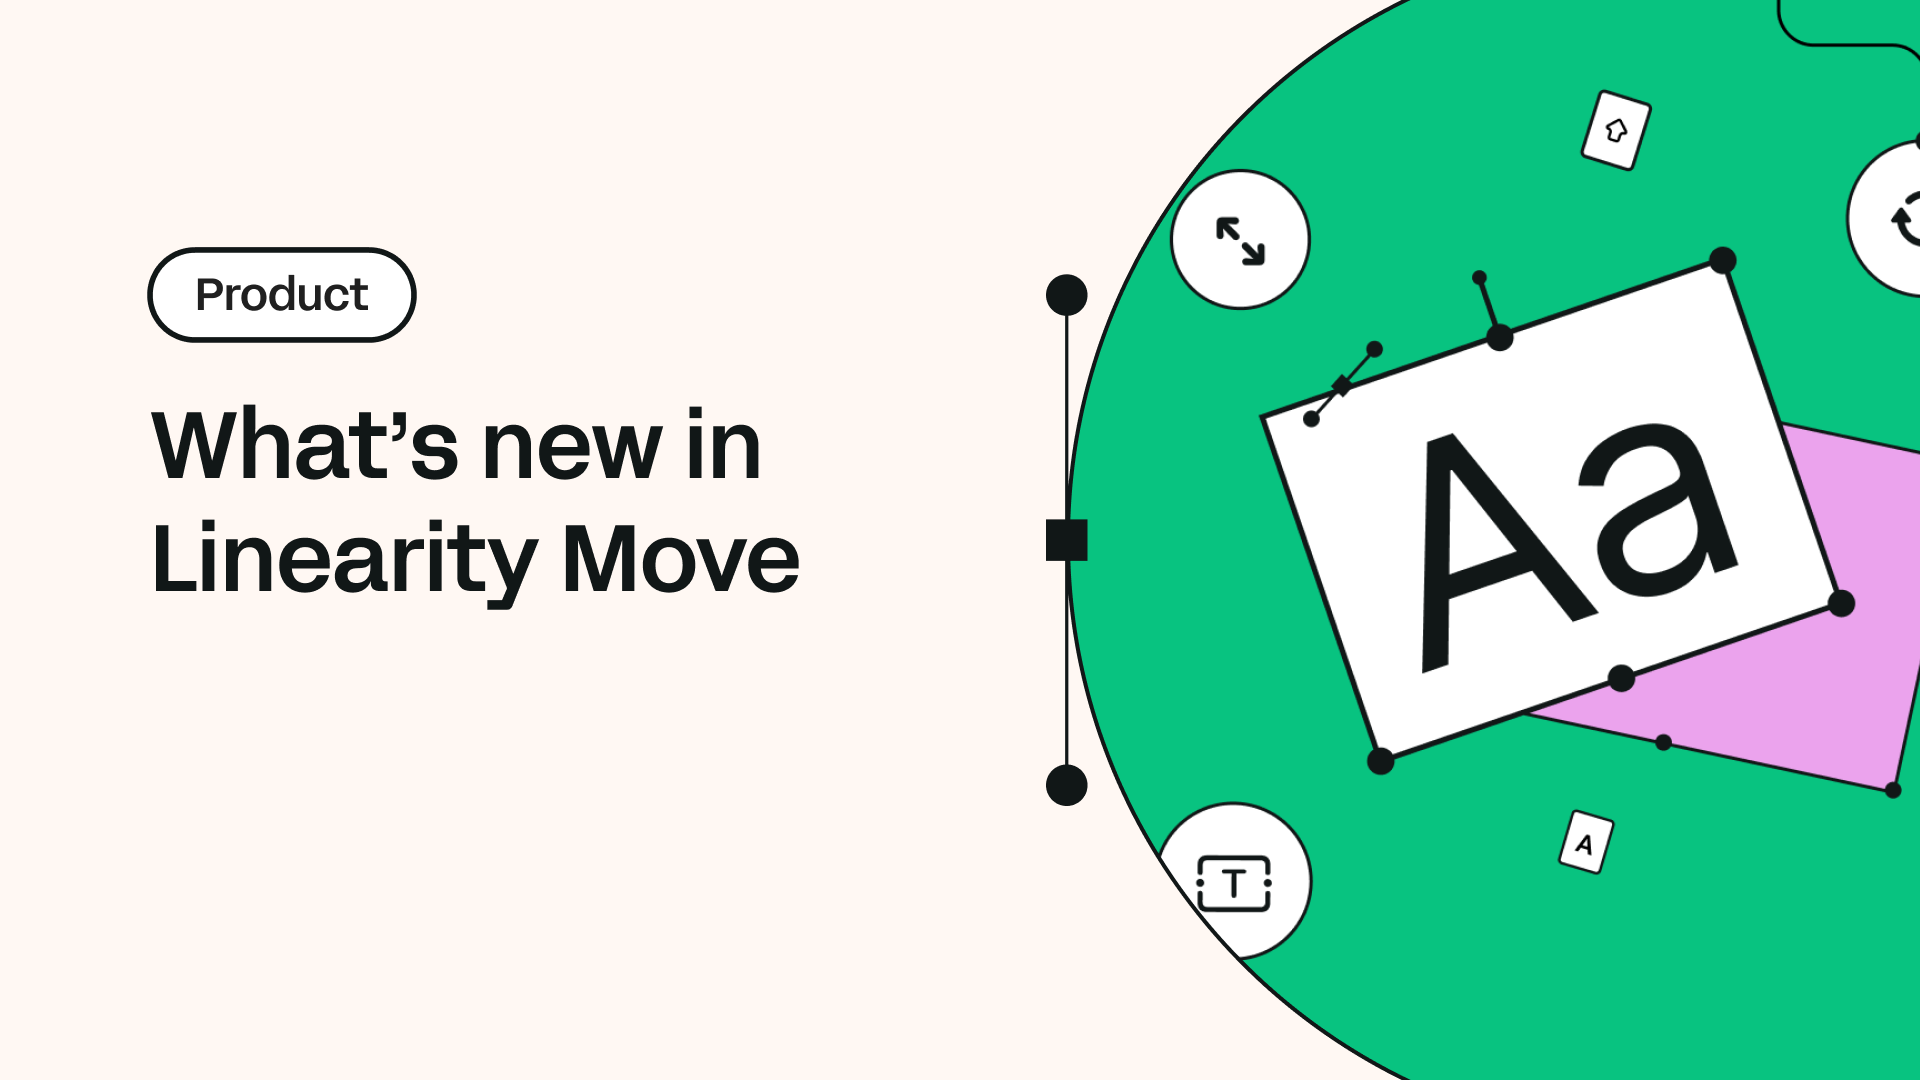 What’s new in Linearity Move